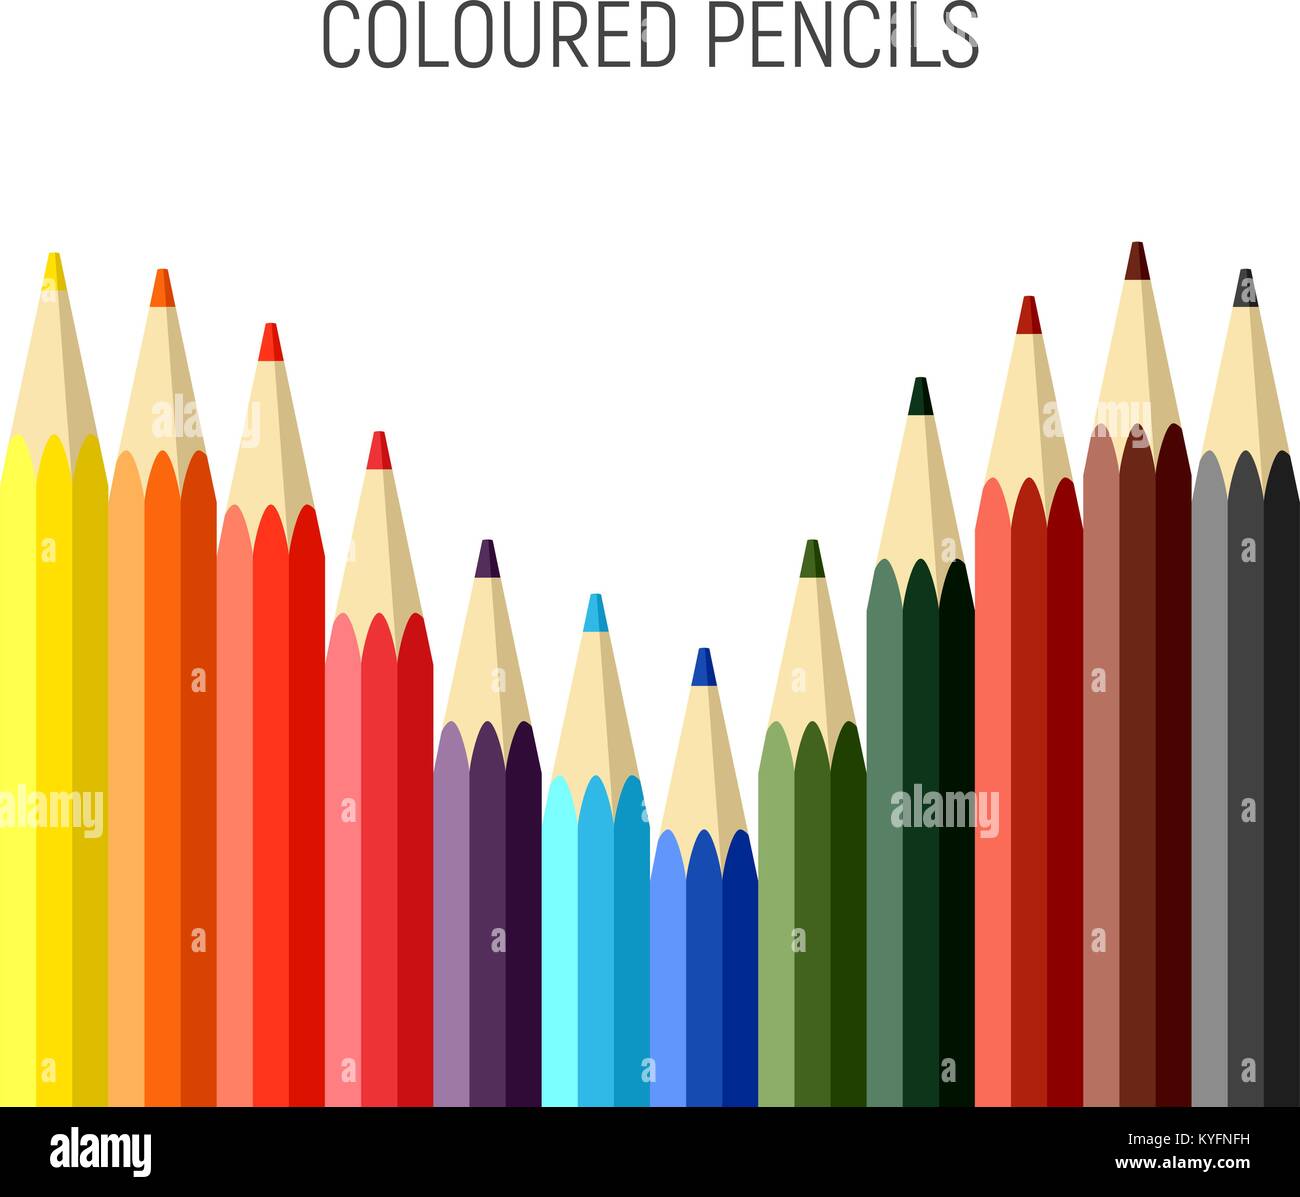 Set Of 12 Colored Pencils Vector Illustration Stock Vector Image And Art